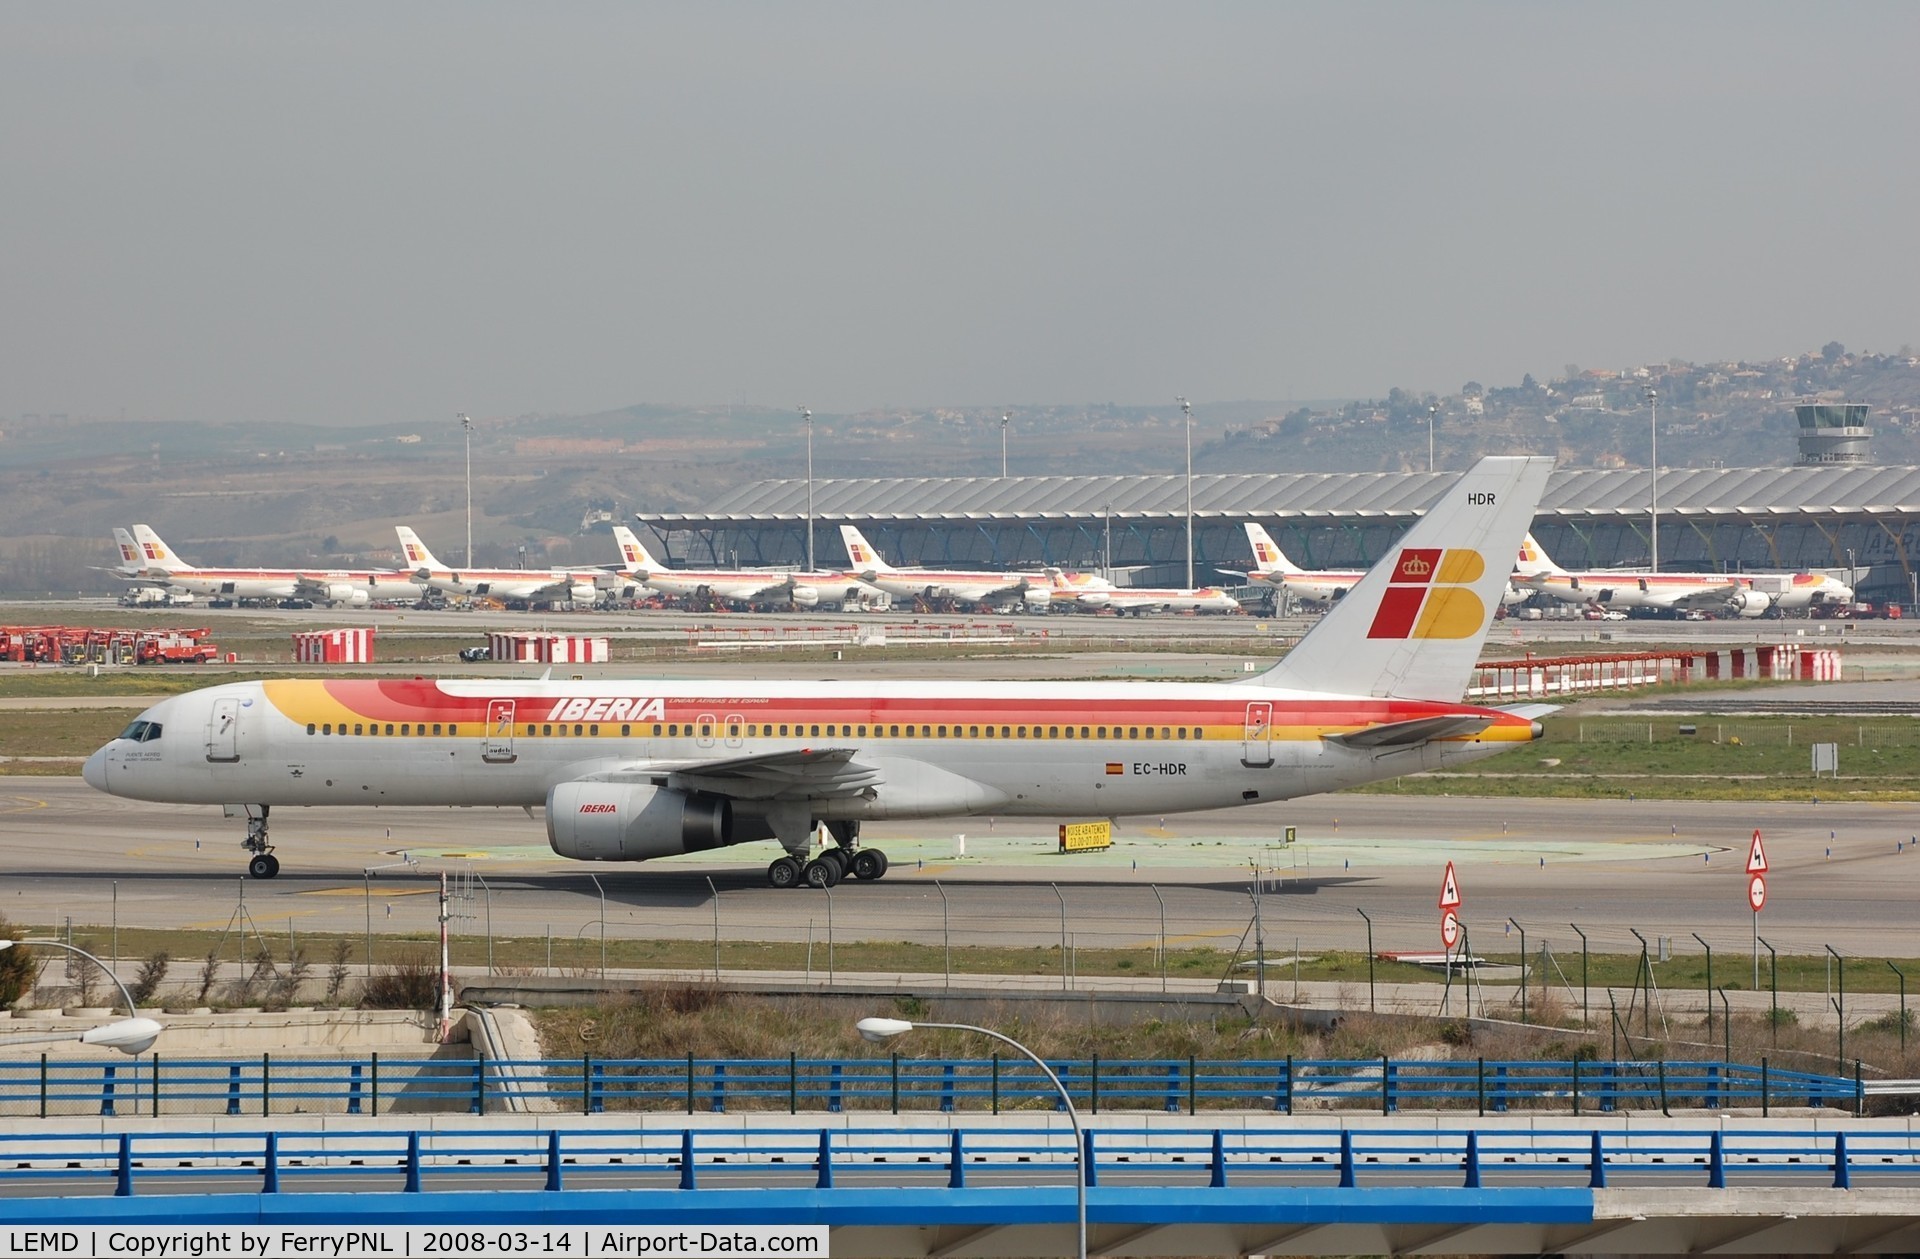 Barajas International Airport, Madrid Spain (LEMD) - View of IB terminal with long haul flights in the background.